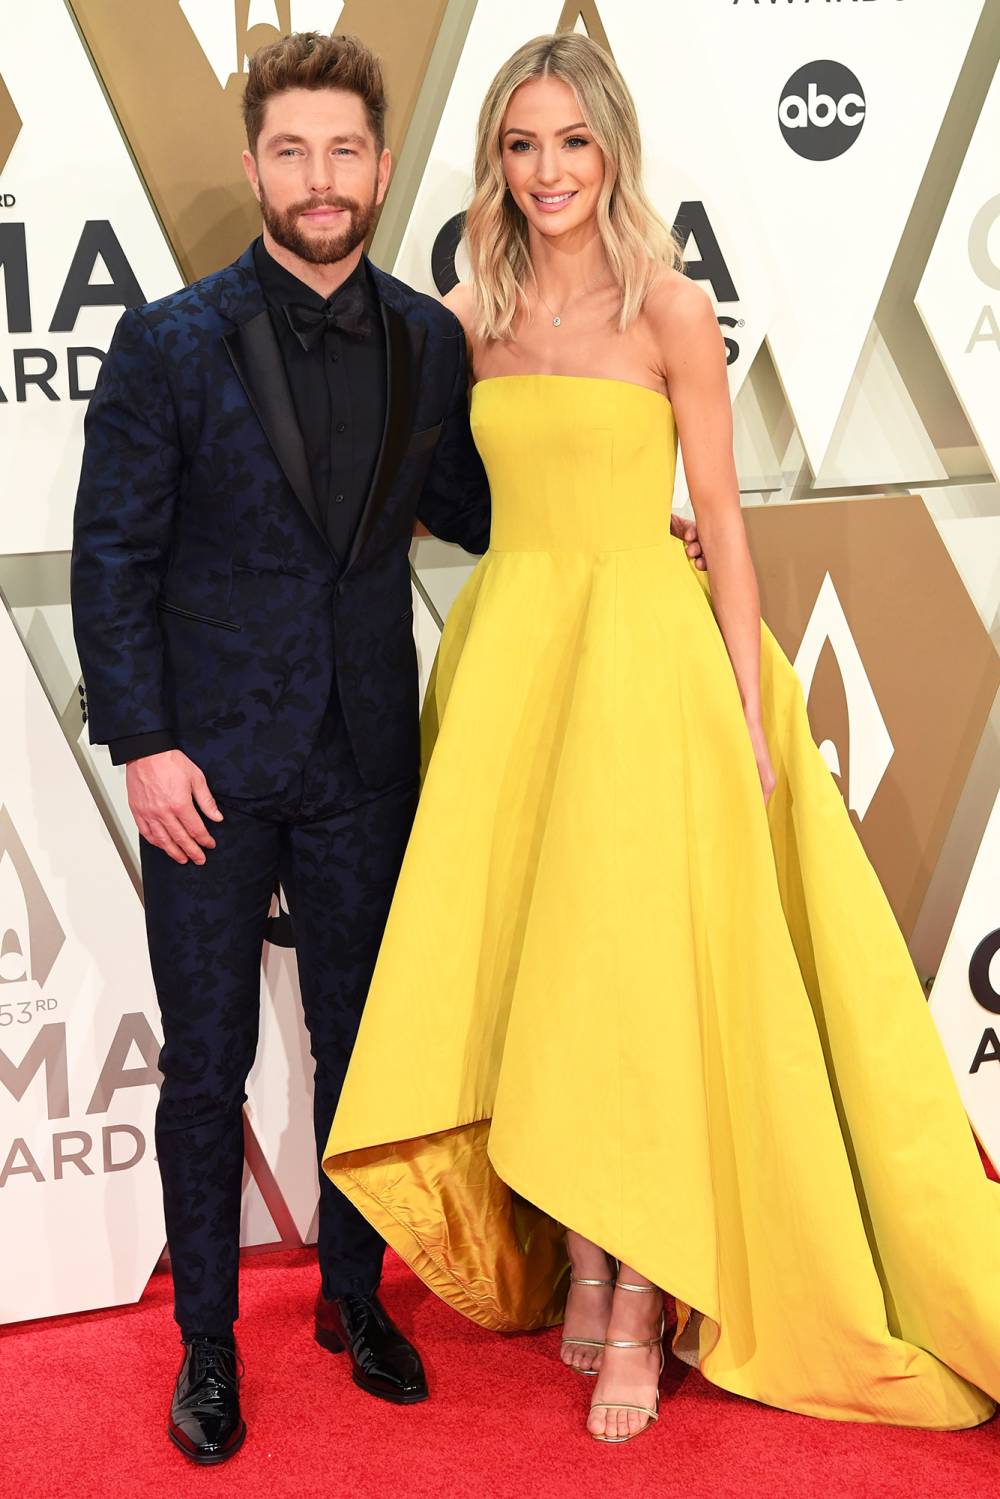 Chris Lane Says It Was 'So Special' Walking the CMA Awards Red Carpet 2019 With His New Wife Lauren Bushnell